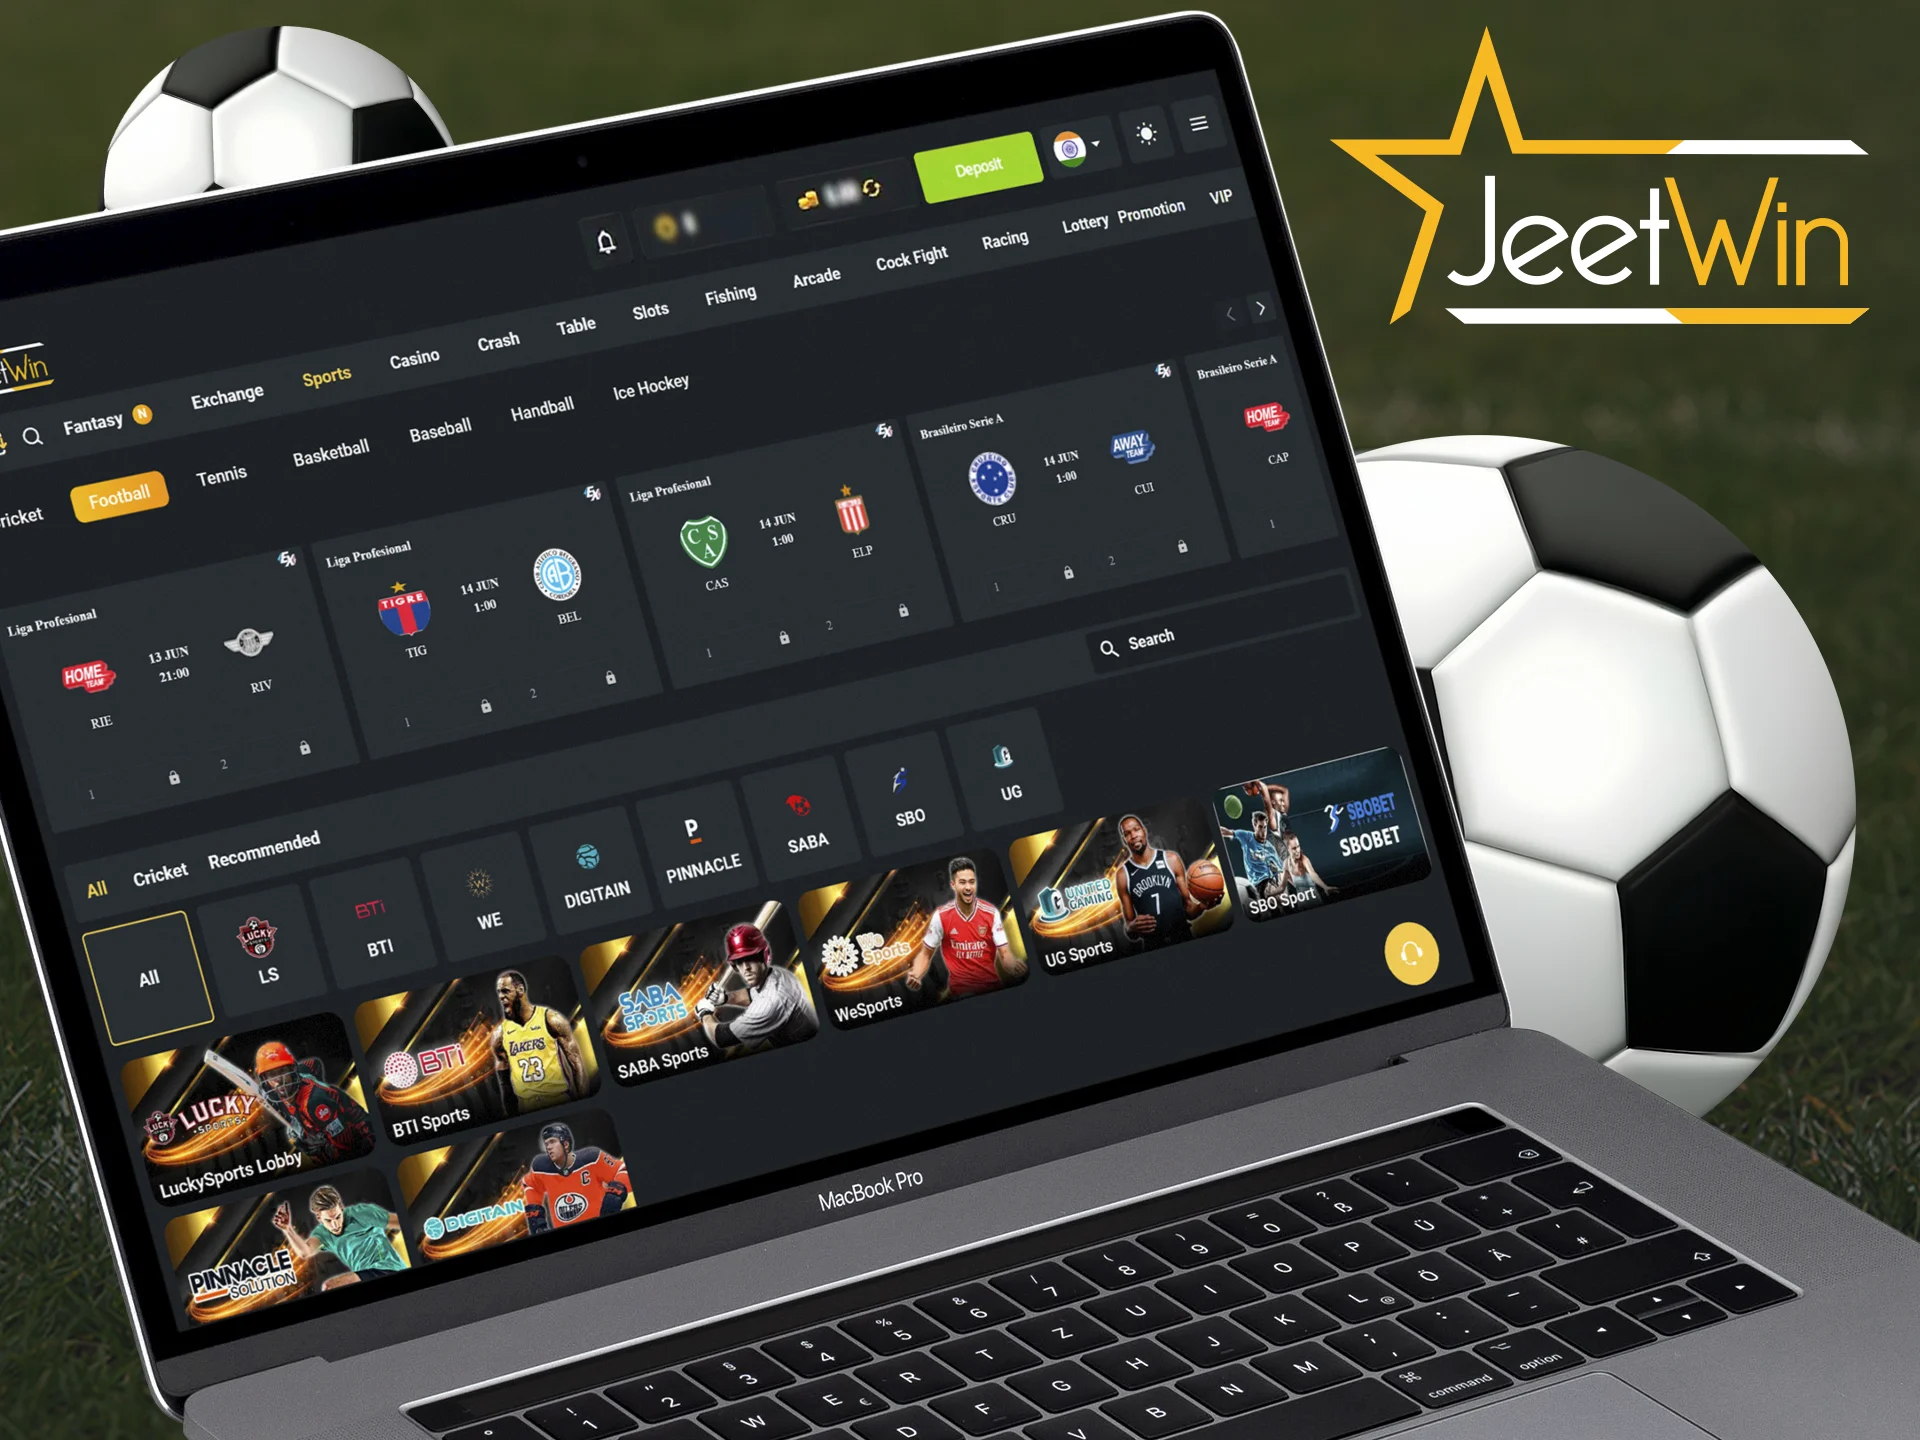 You can find football matches in the sports section of the Jeetwin website.